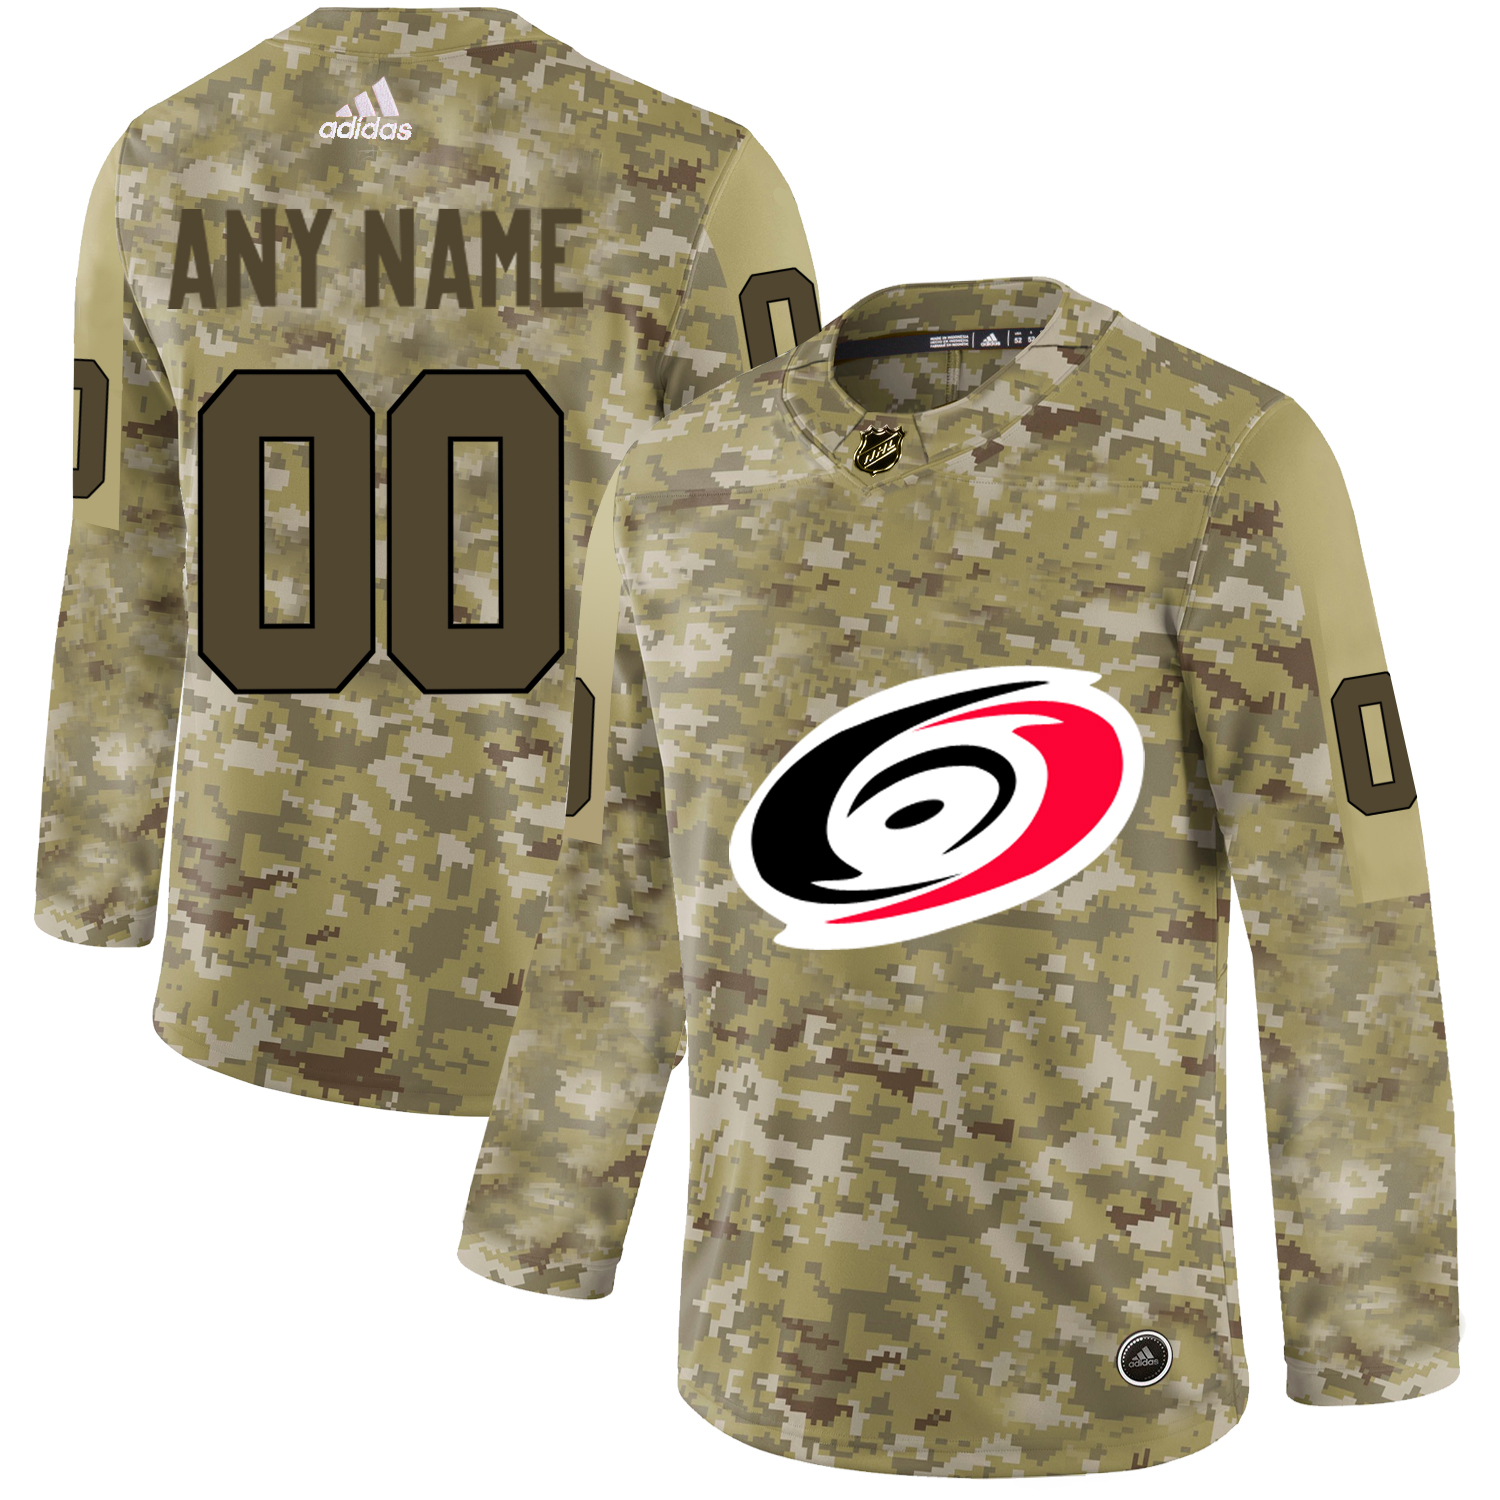 Men's Adidas Hurricanes Personalized Camo Authentic NHL Jersey